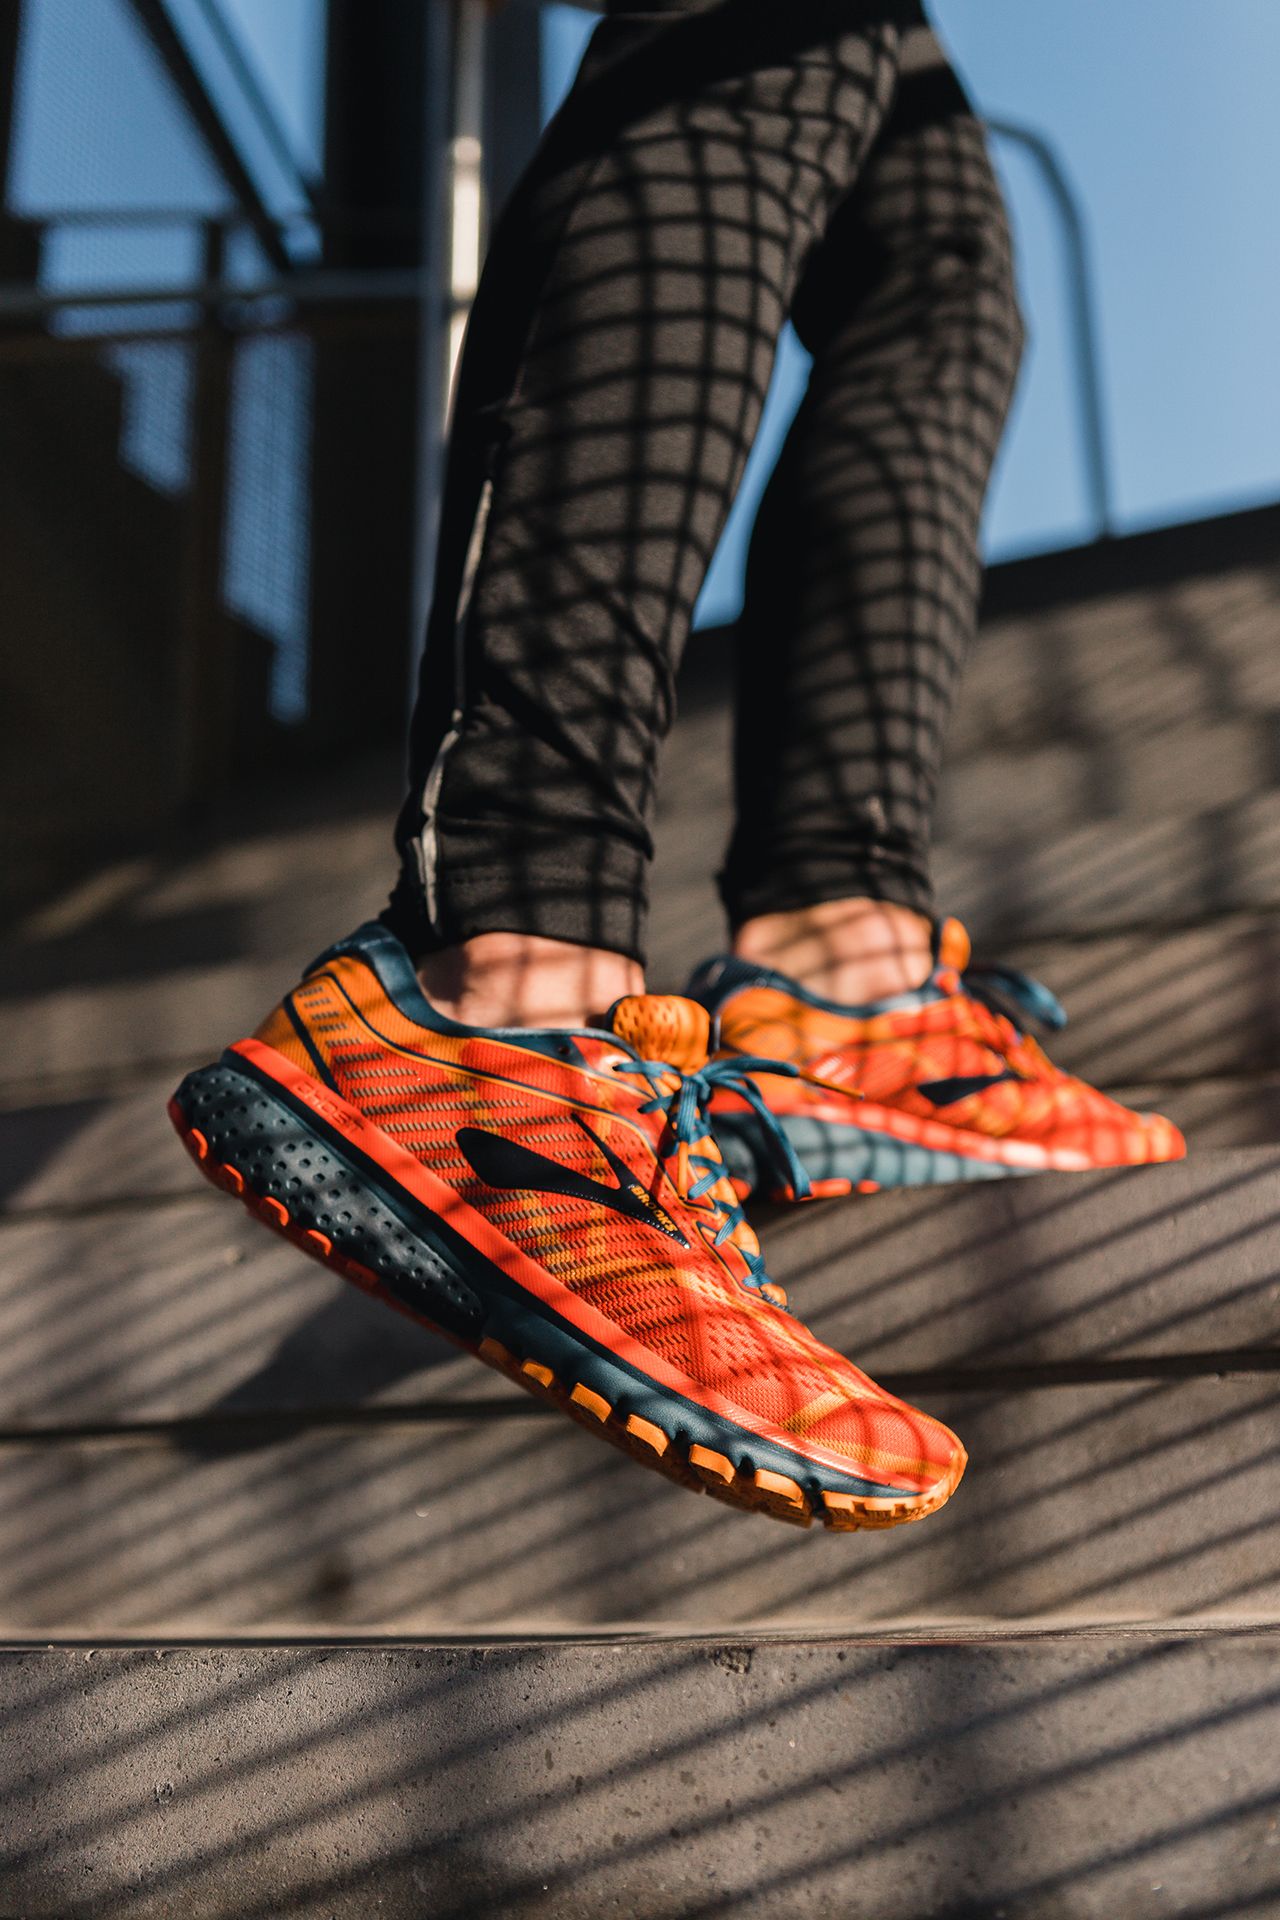 The Exclusive Brooks X Fleet Feet Turkey Trot Shoe Is Perfect For Your